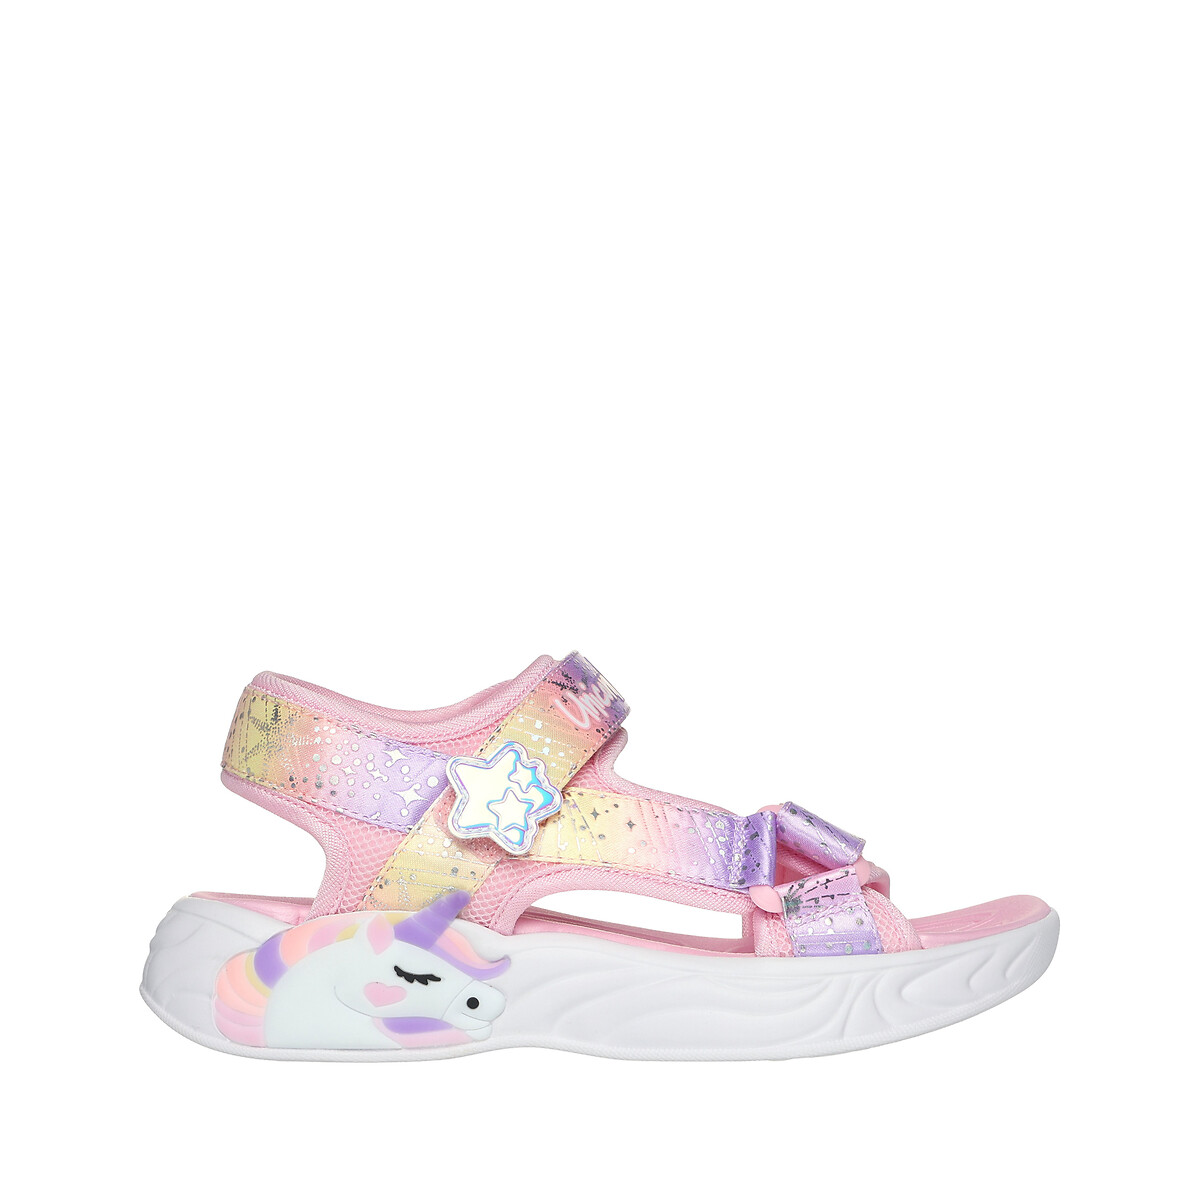 Kids Unicorn Dreams - Majestic Bliss Sandals with Touch ’n’ Close Fastening